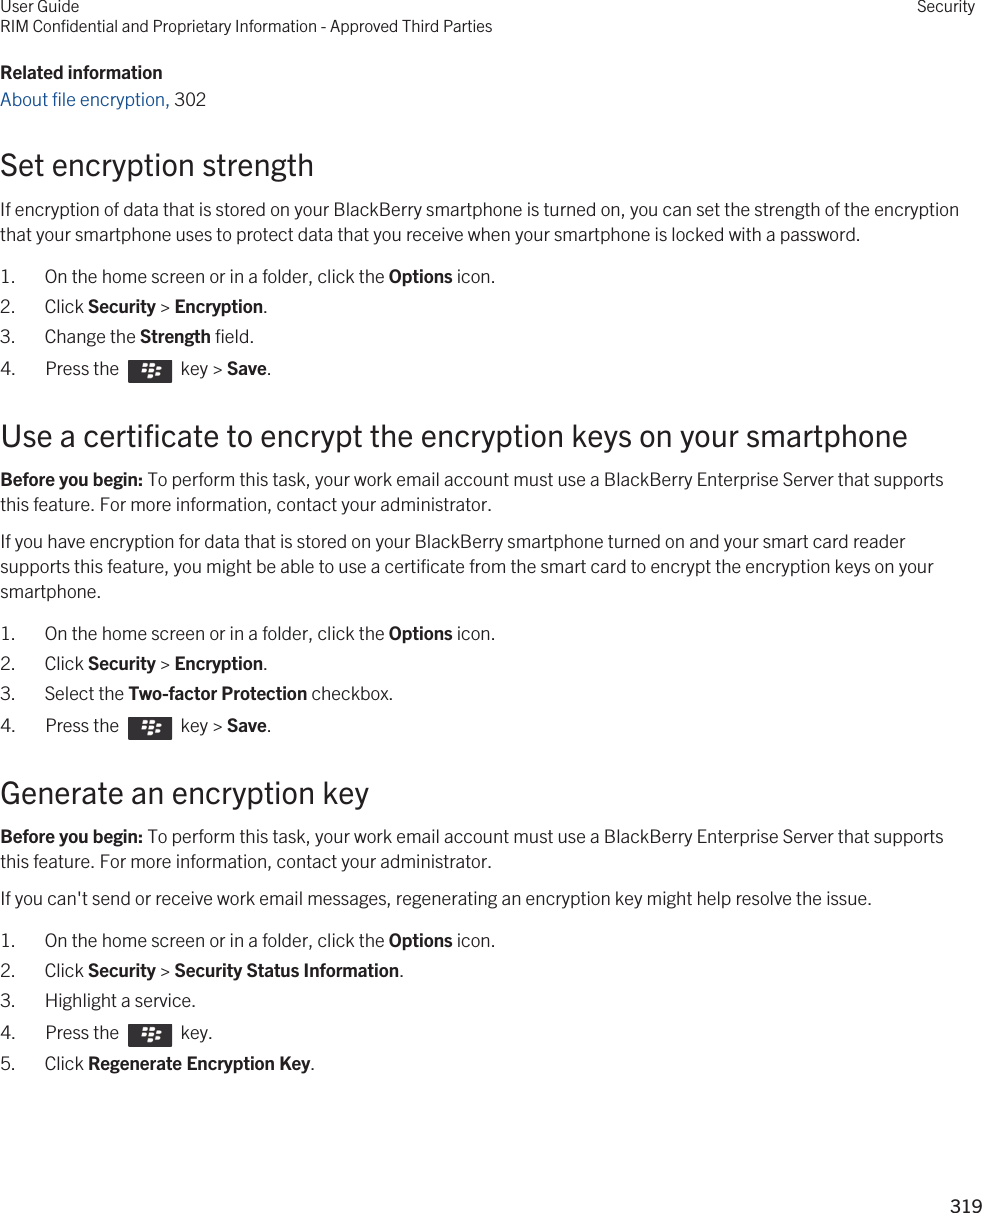 Related informationAbout file encryption, 302 Set encryption strengthIf encryption of data that is stored on your BlackBerry smartphone is turned on, you can set the strength of the encryption that your smartphone uses to protect data that you receive when your smartphone is locked with a password.1. On the home screen or in a folder, click the Options icon.2. Click Security &gt; Encryption.3. Change the Strength field.4.  Press the    key &gt; Save. Use a certificate to encrypt the encryption keys on your smartphoneBefore you begin: To perform this task, your work email account must use a BlackBerry Enterprise Server that supports this feature. For more information, contact your administrator.If you have encryption for data that is stored on your BlackBerry smartphone turned on and your smart card reader supports this feature, you might be able to use a certificate from the smart card to encrypt the encryption keys on your smartphone.1. On the home screen or in a folder, click the Options icon.2. Click Security &gt; Encryption.3. Select the Two-factor Protection checkbox.4.  Press the    key &gt; Save. Generate an encryption keyBefore you begin: To perform this task, your work email account must use a BlackBerry Enterprise Server that supports this feature. For more information, contact your administrator.If you can&apos;t send or receive work email messages, regenerating an encryption key might help resolve the issue.1. On the home screen or in a folder, click the Options icon.2. Click Security &gt; Security Status Information.3. Highlight a service.4.  Press the    key. 5. Click Regenerate Encryption Key.User GuideRIM Confidential and Proprietary Information - Approved Third PartiesSecurity319 